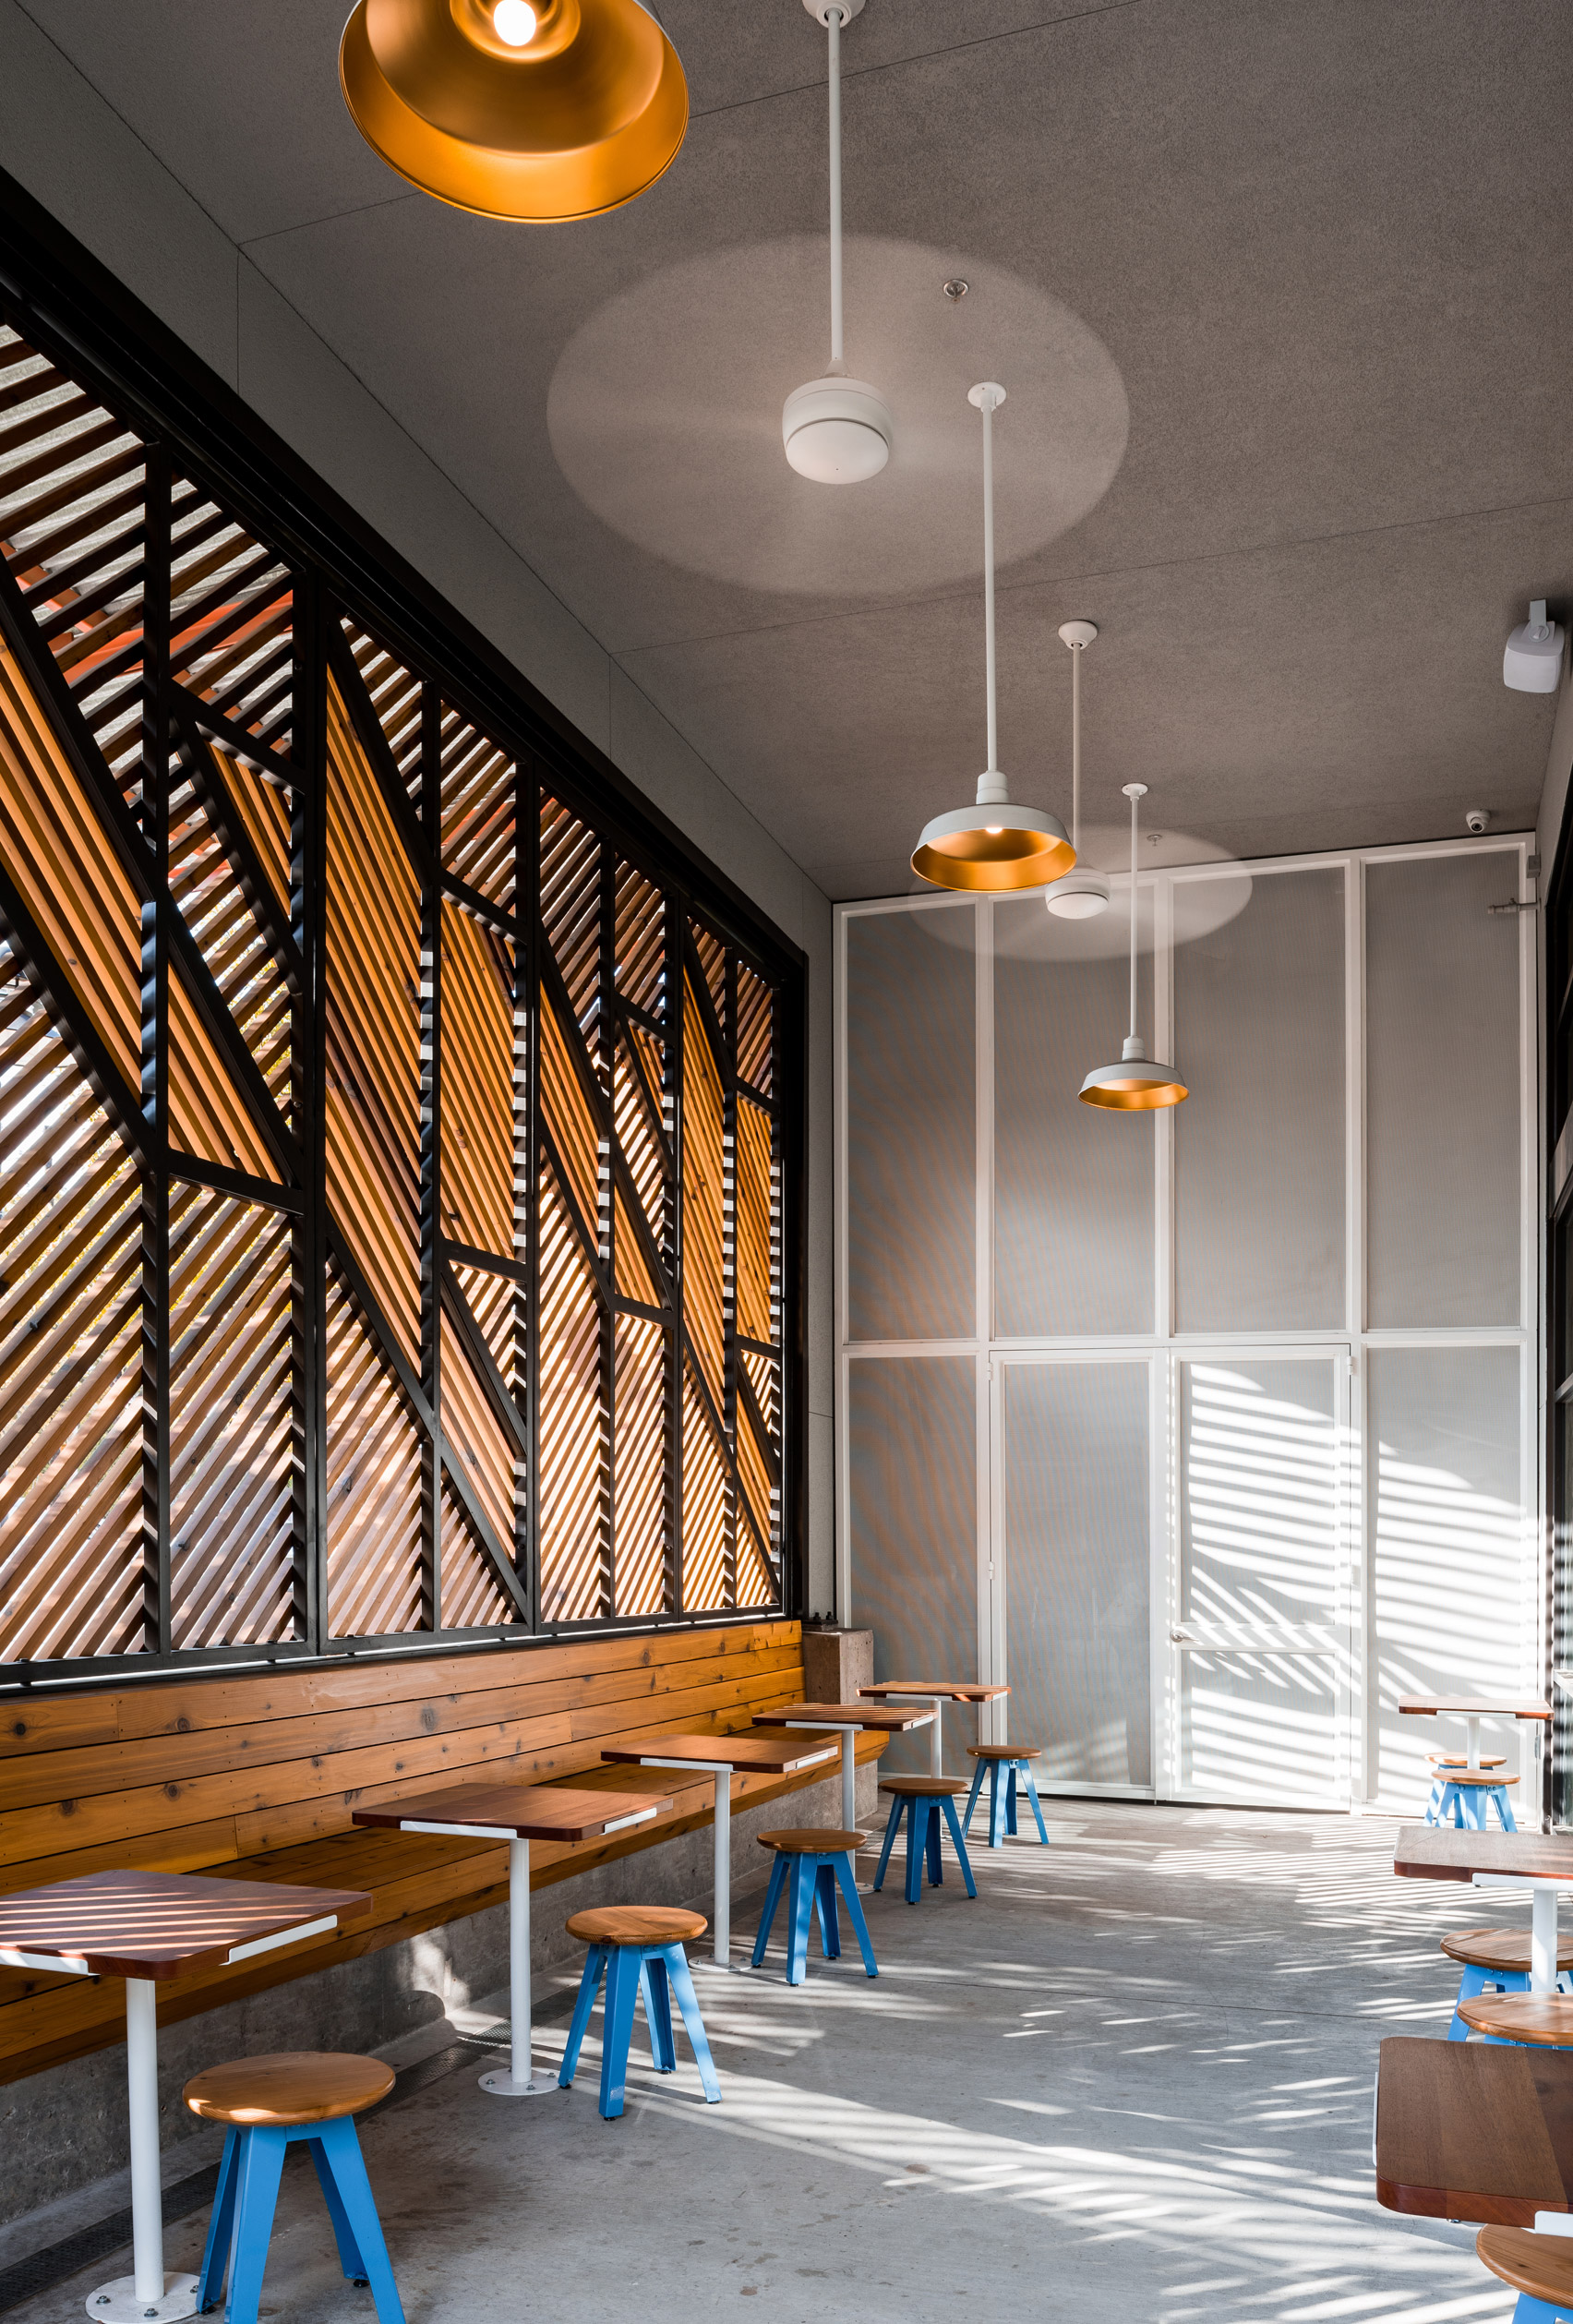 houndstooth-coffee-and-jettison-cocktail-bar-official-sylvan-thirty-texas-usa_dezeen_1704_col_0